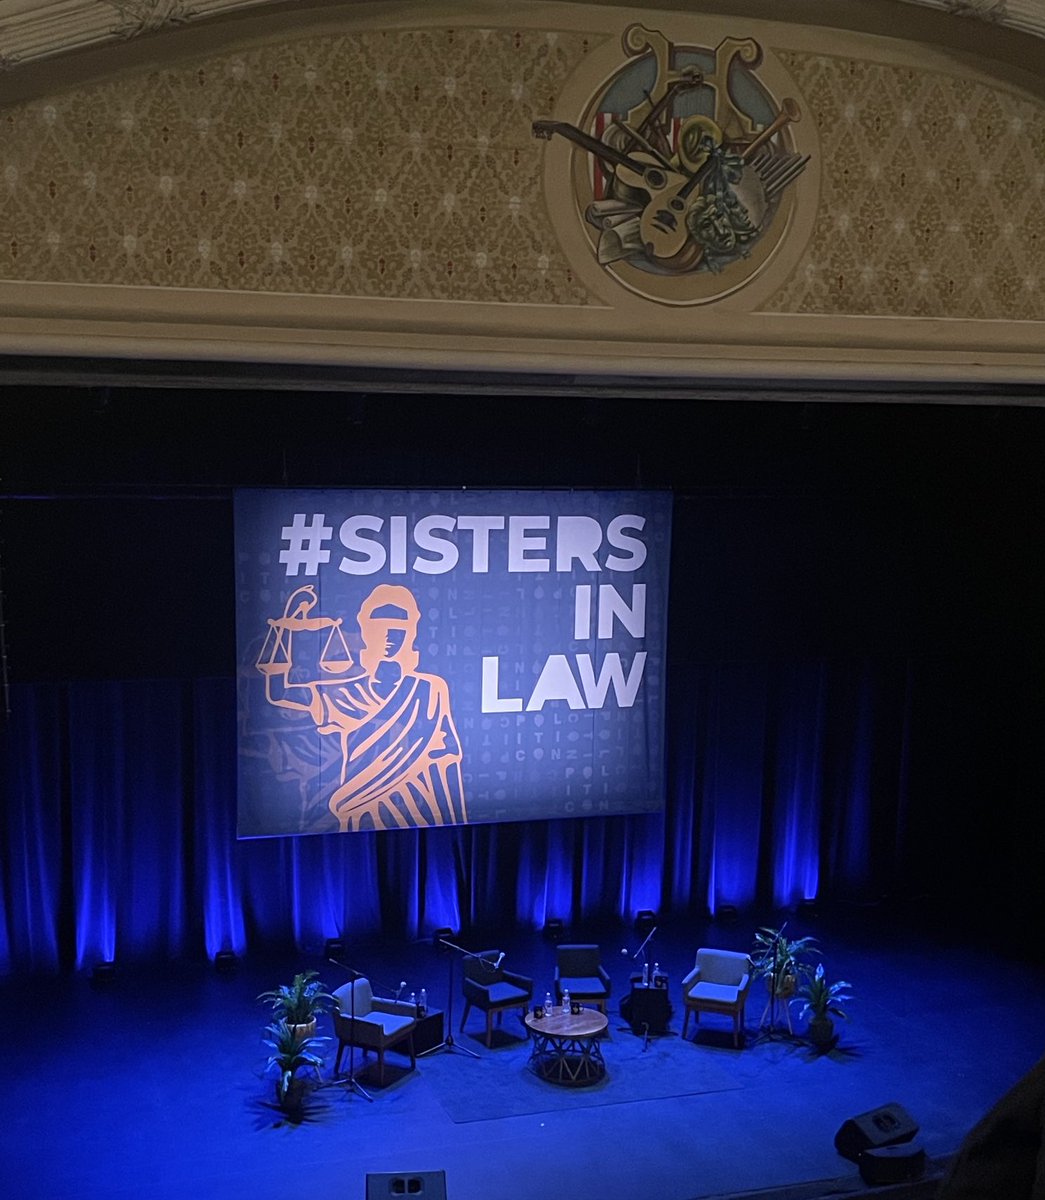 ⁦@StephMillerShow⁩ ⁦@fromthebunkerjr⁩ ⁦@RadioGuyChris⁩ Guess where I am? #SistersInLaw